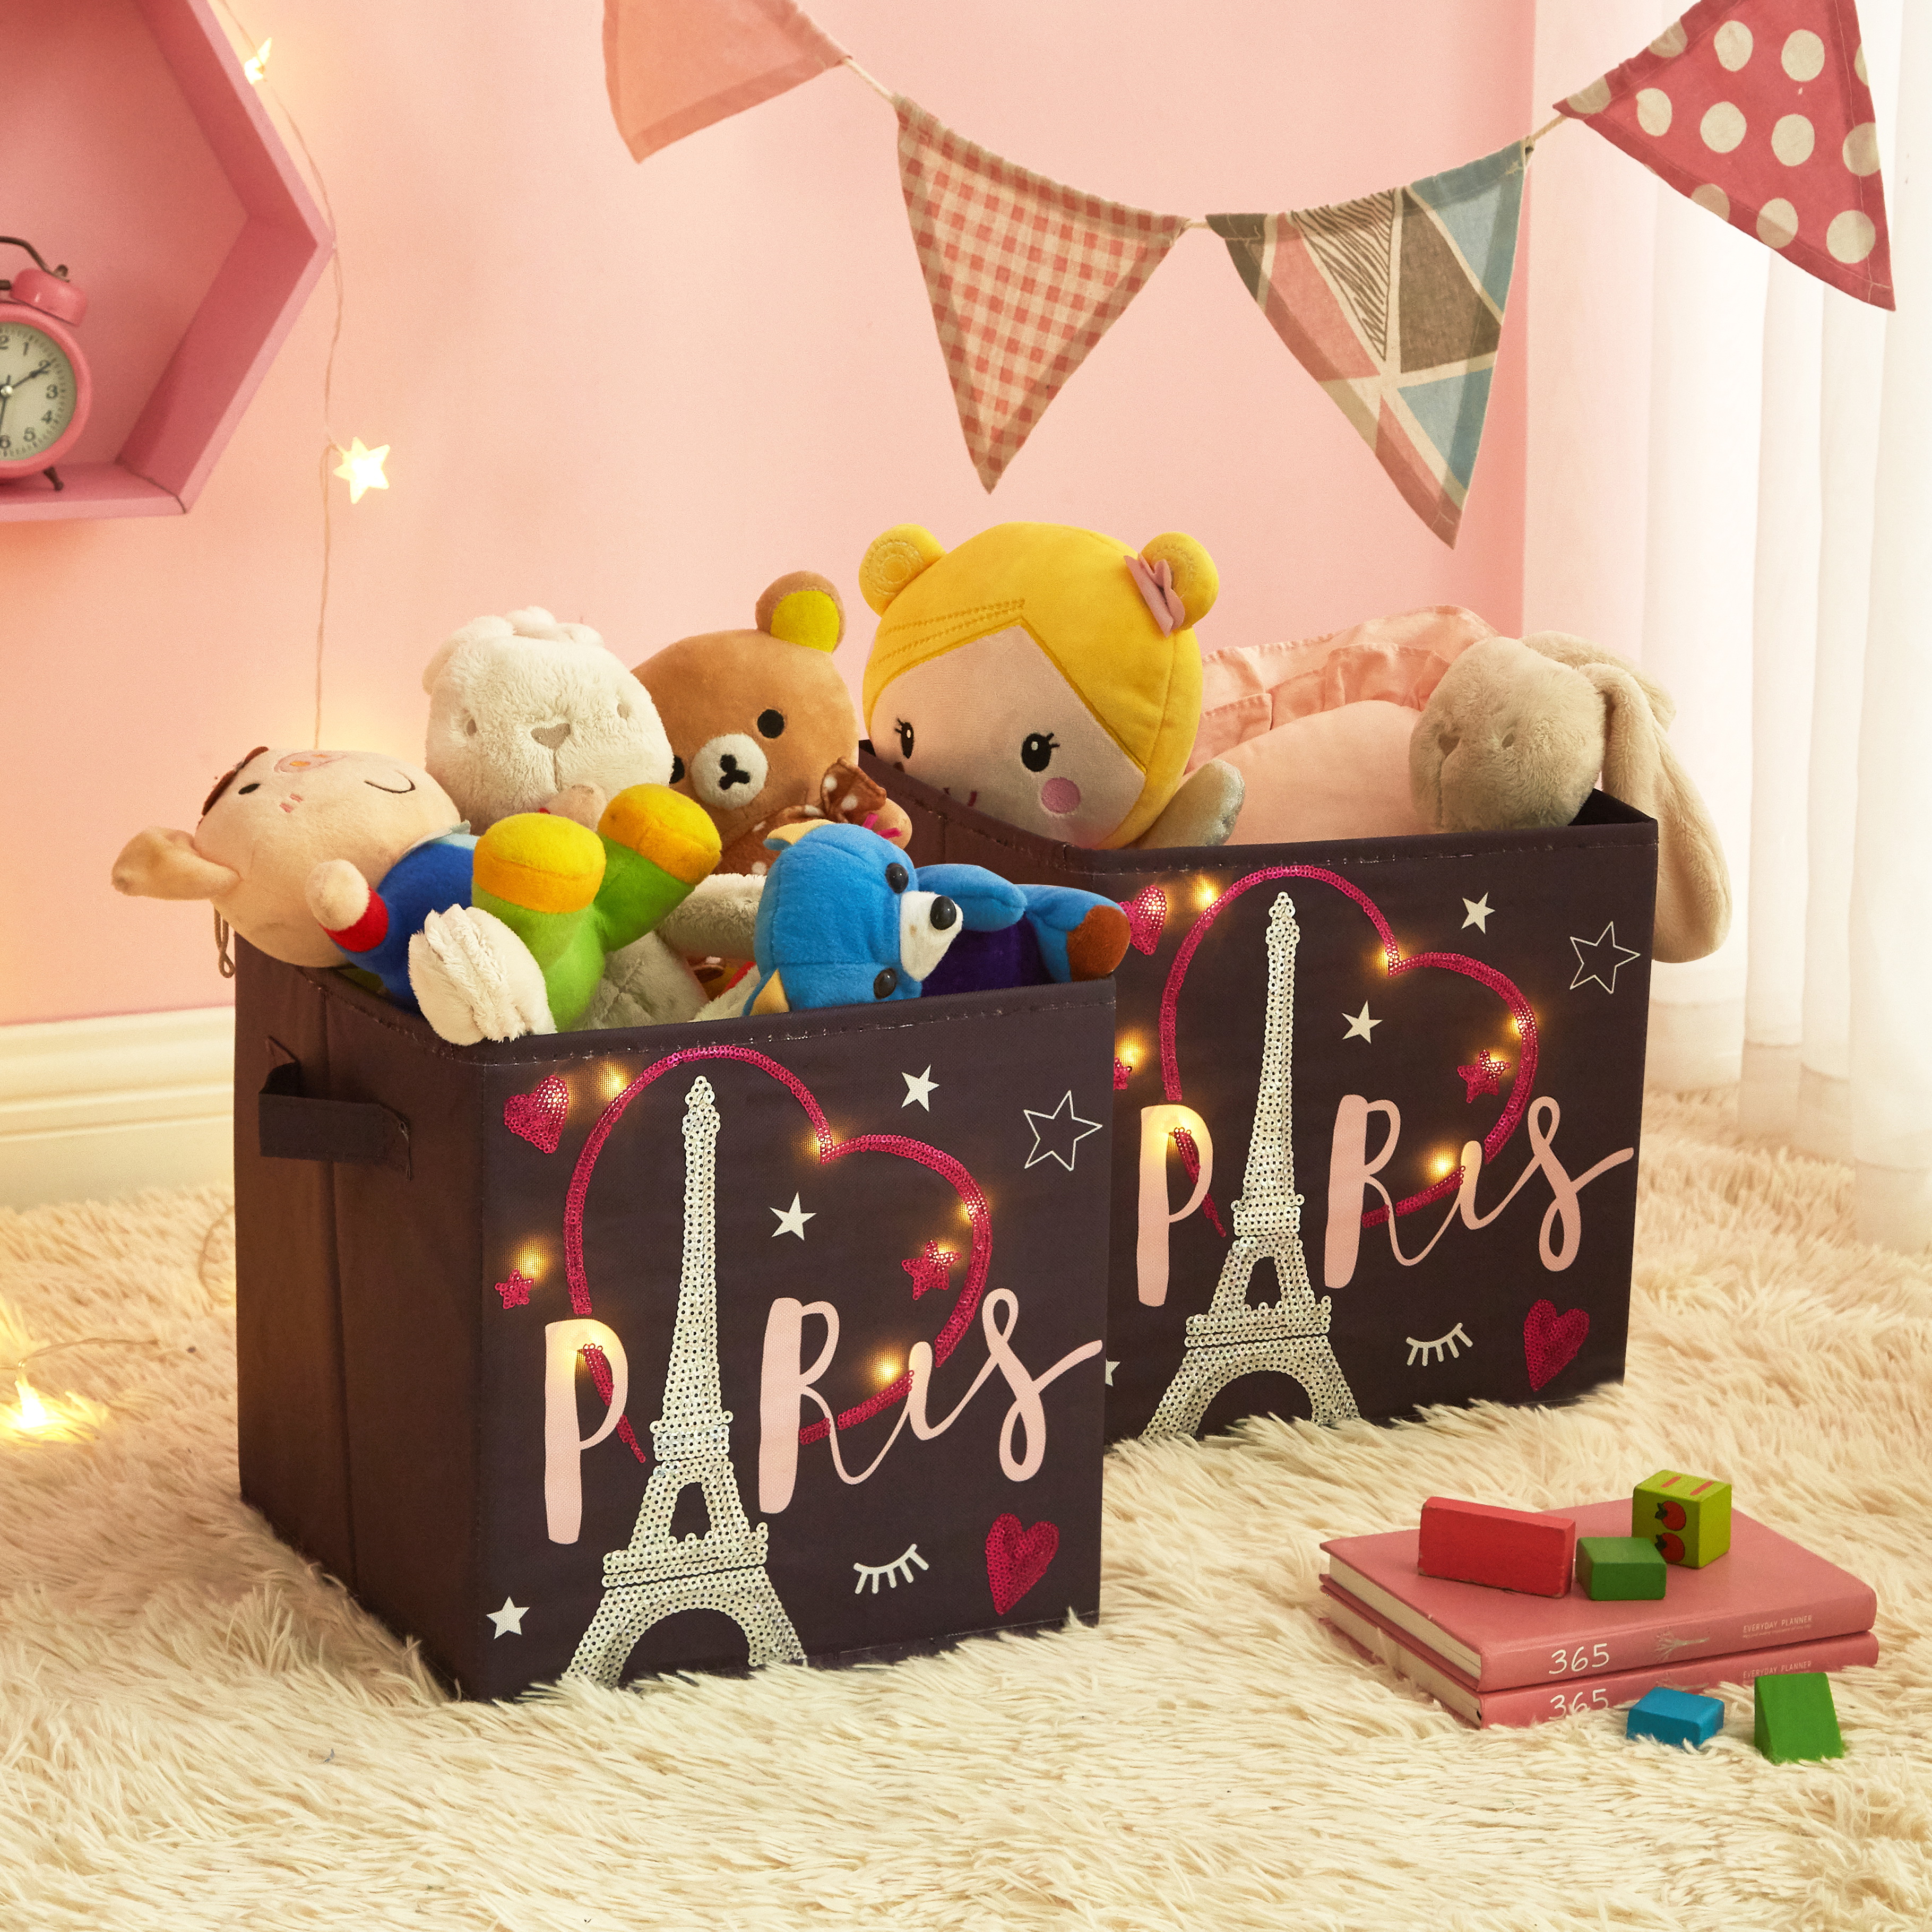 Heritage Club Paris 2 Piece Light Up Polyester Storage Cubes for Kids - image 1 of 7